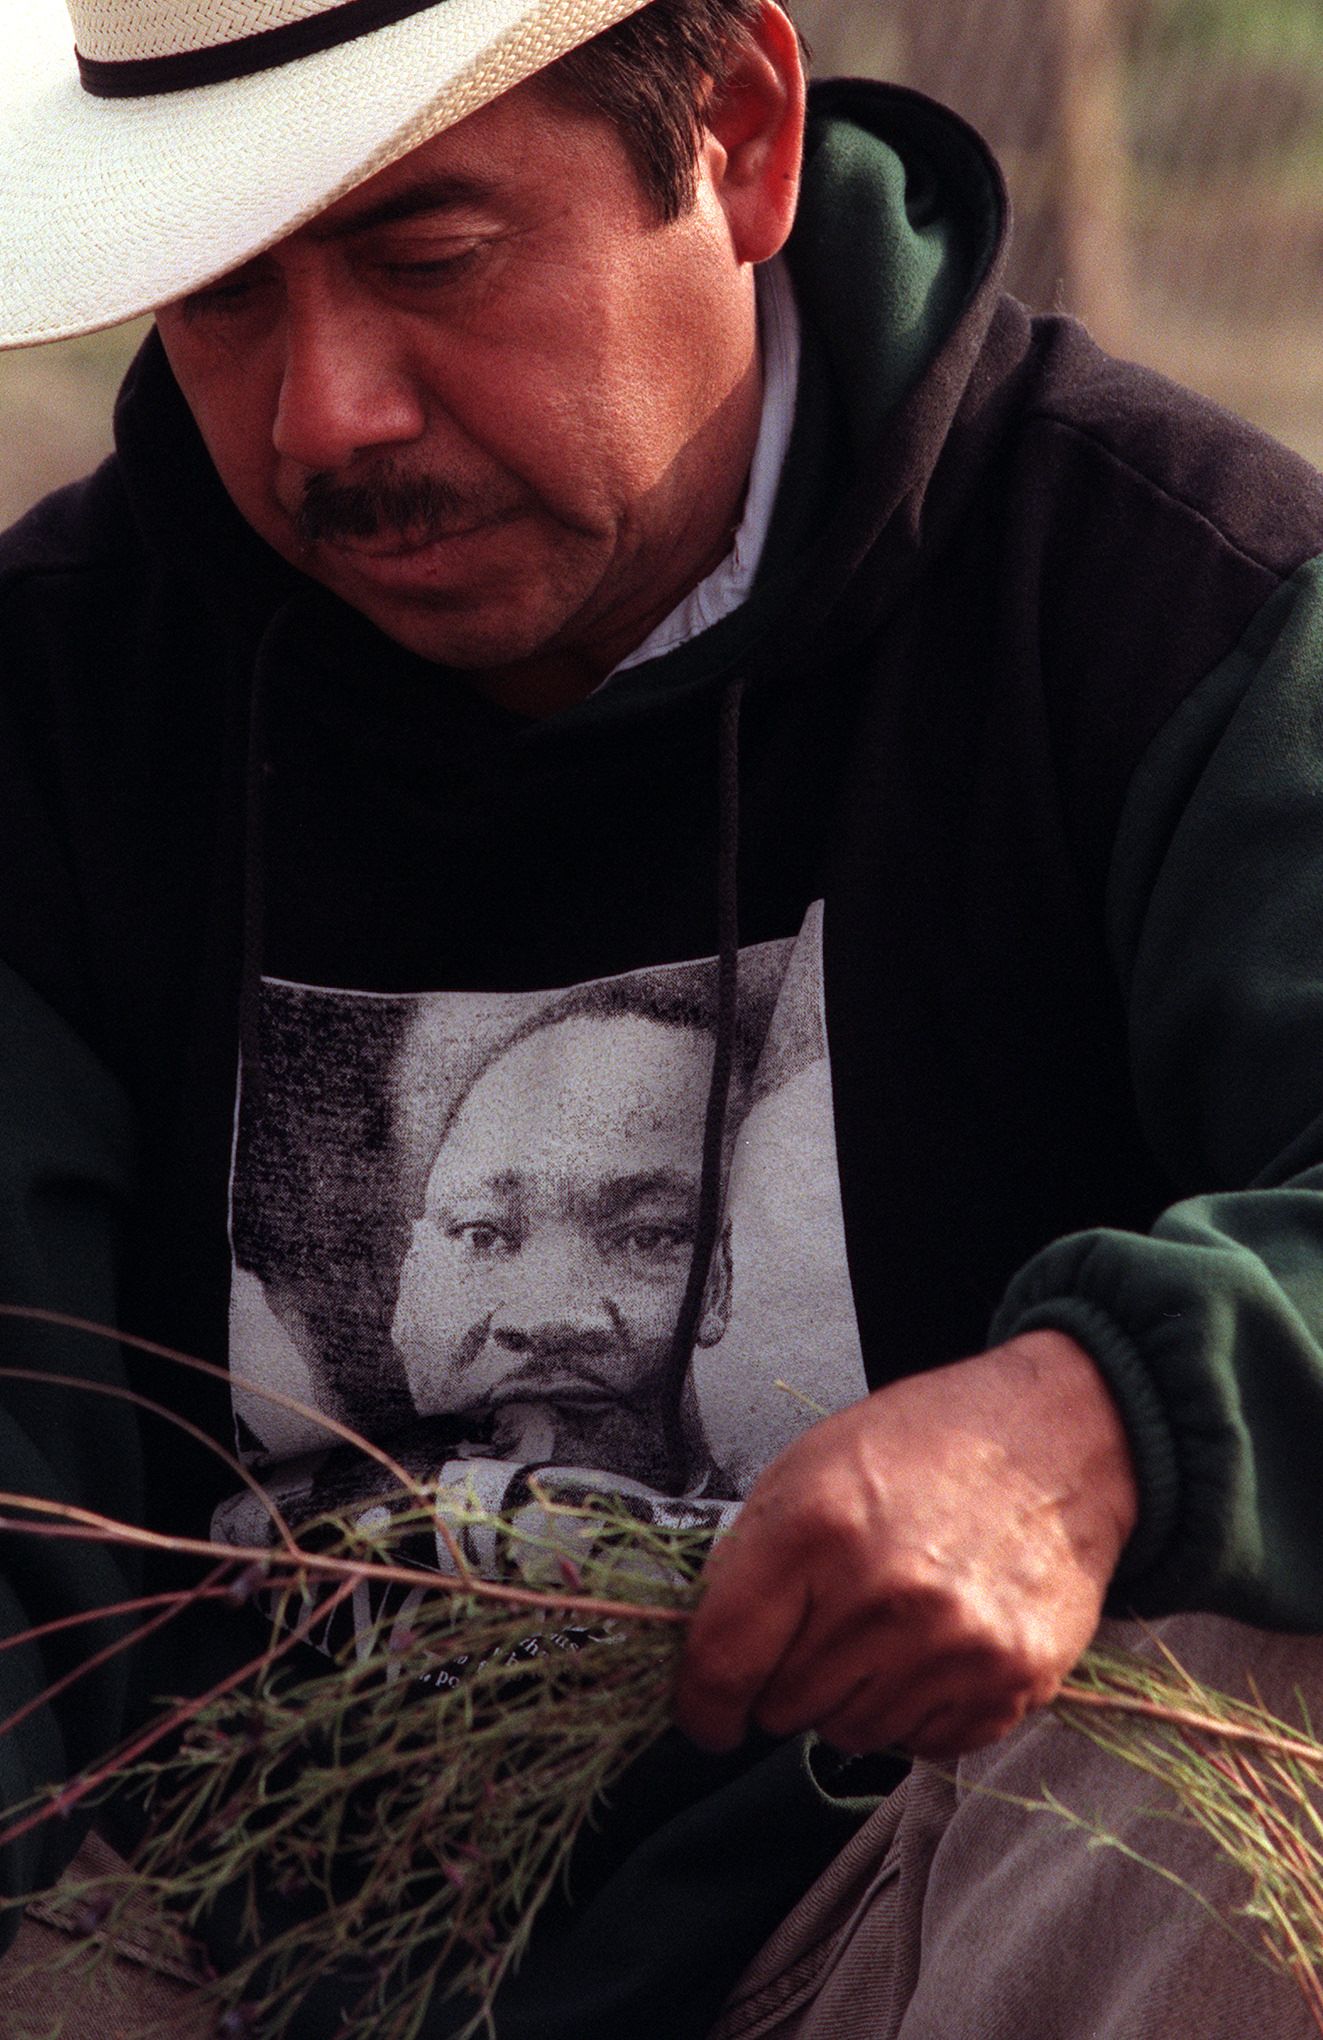 Gaspar Carmen wears a Martin Luther King Jr. sweatshirt as he works in a communal vegetable garden where Latinos and African Americans till their plots side by side in Los Angeles.